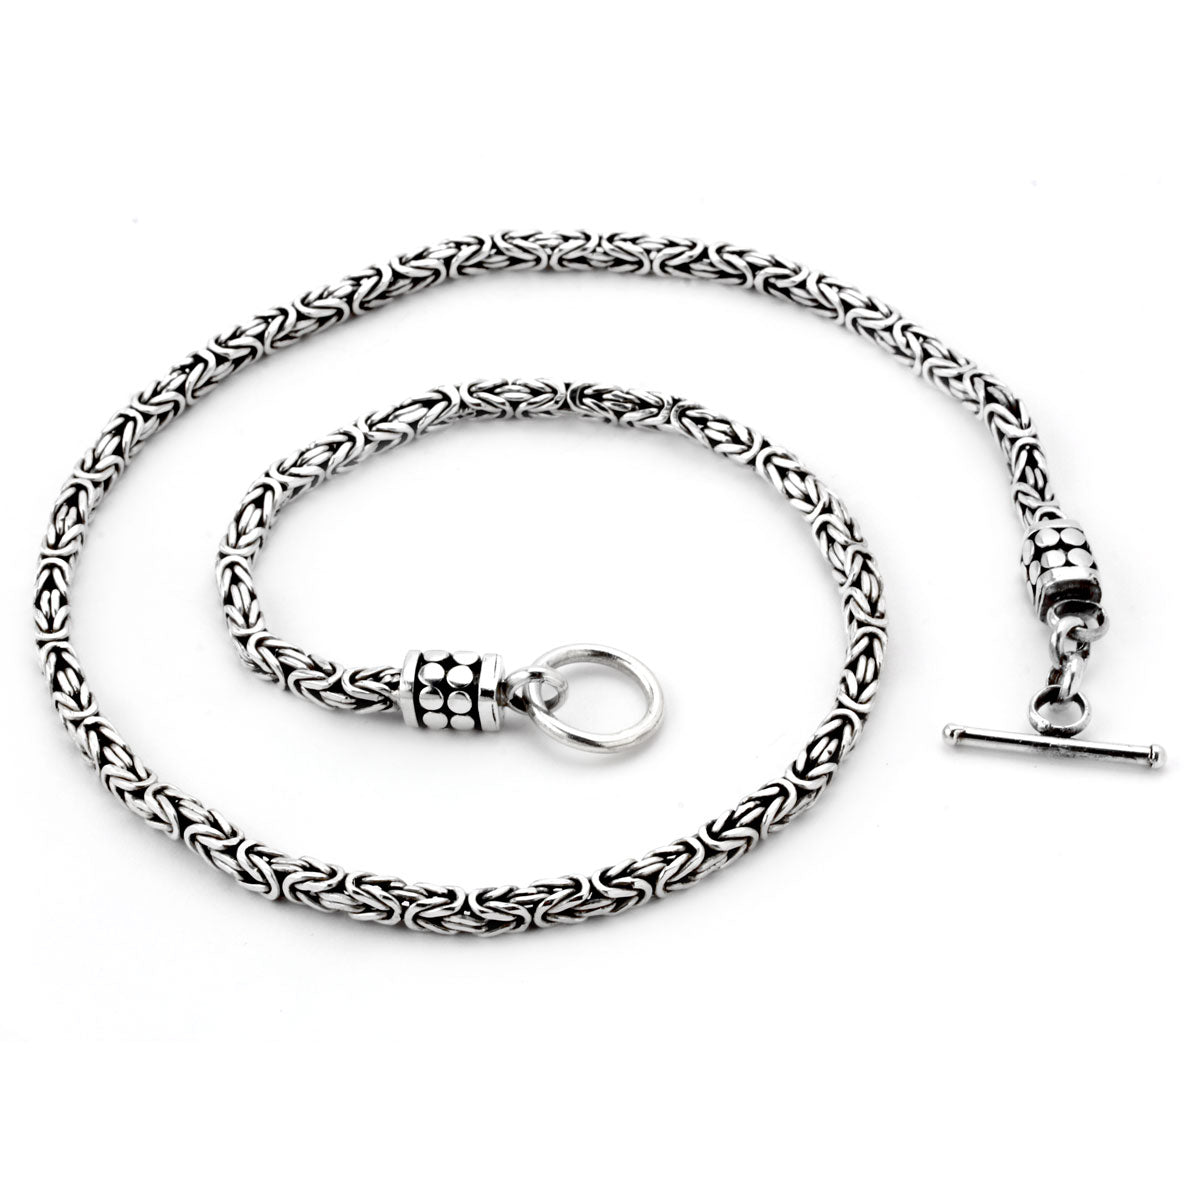 Bali Sterling Silver Byzantine Chain with Toggle Closure